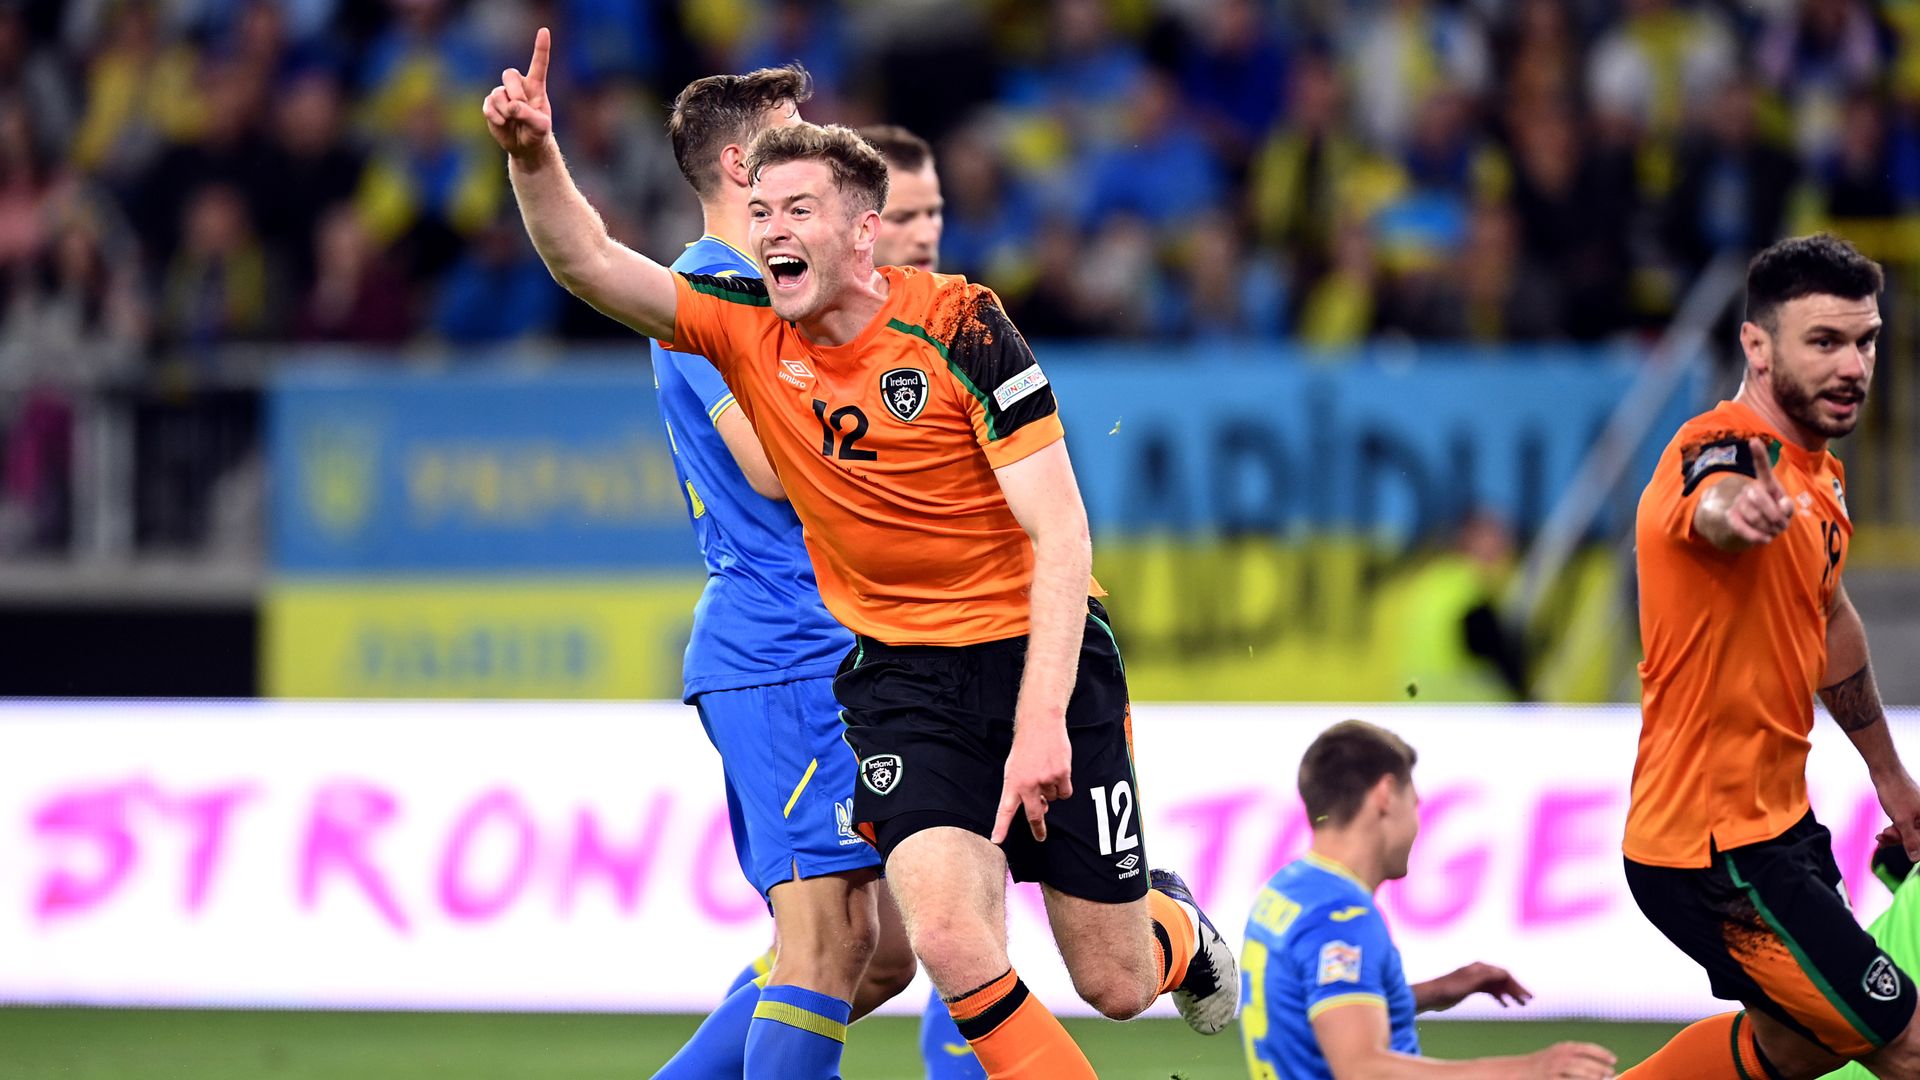 Collins wondergoal cancelled out as Ireland held by Ukraine